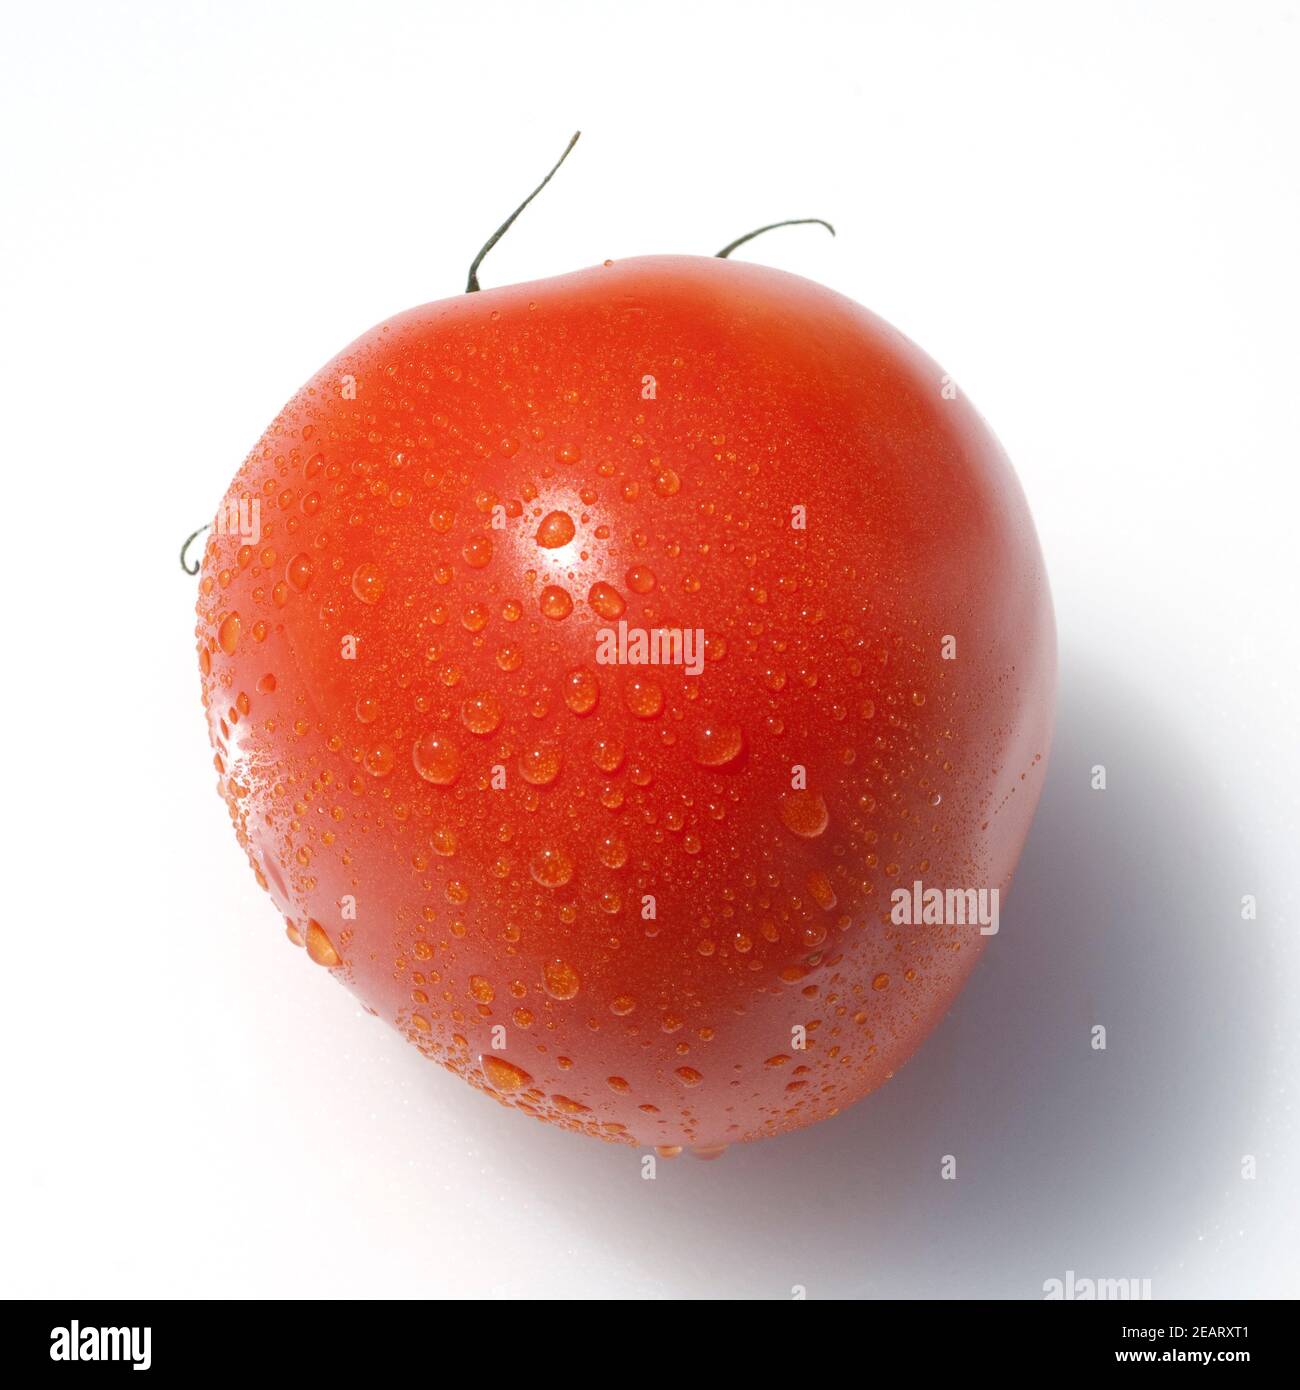 images - - 3 variety tomatoes Roma stock photography Page Alamy hi-res and